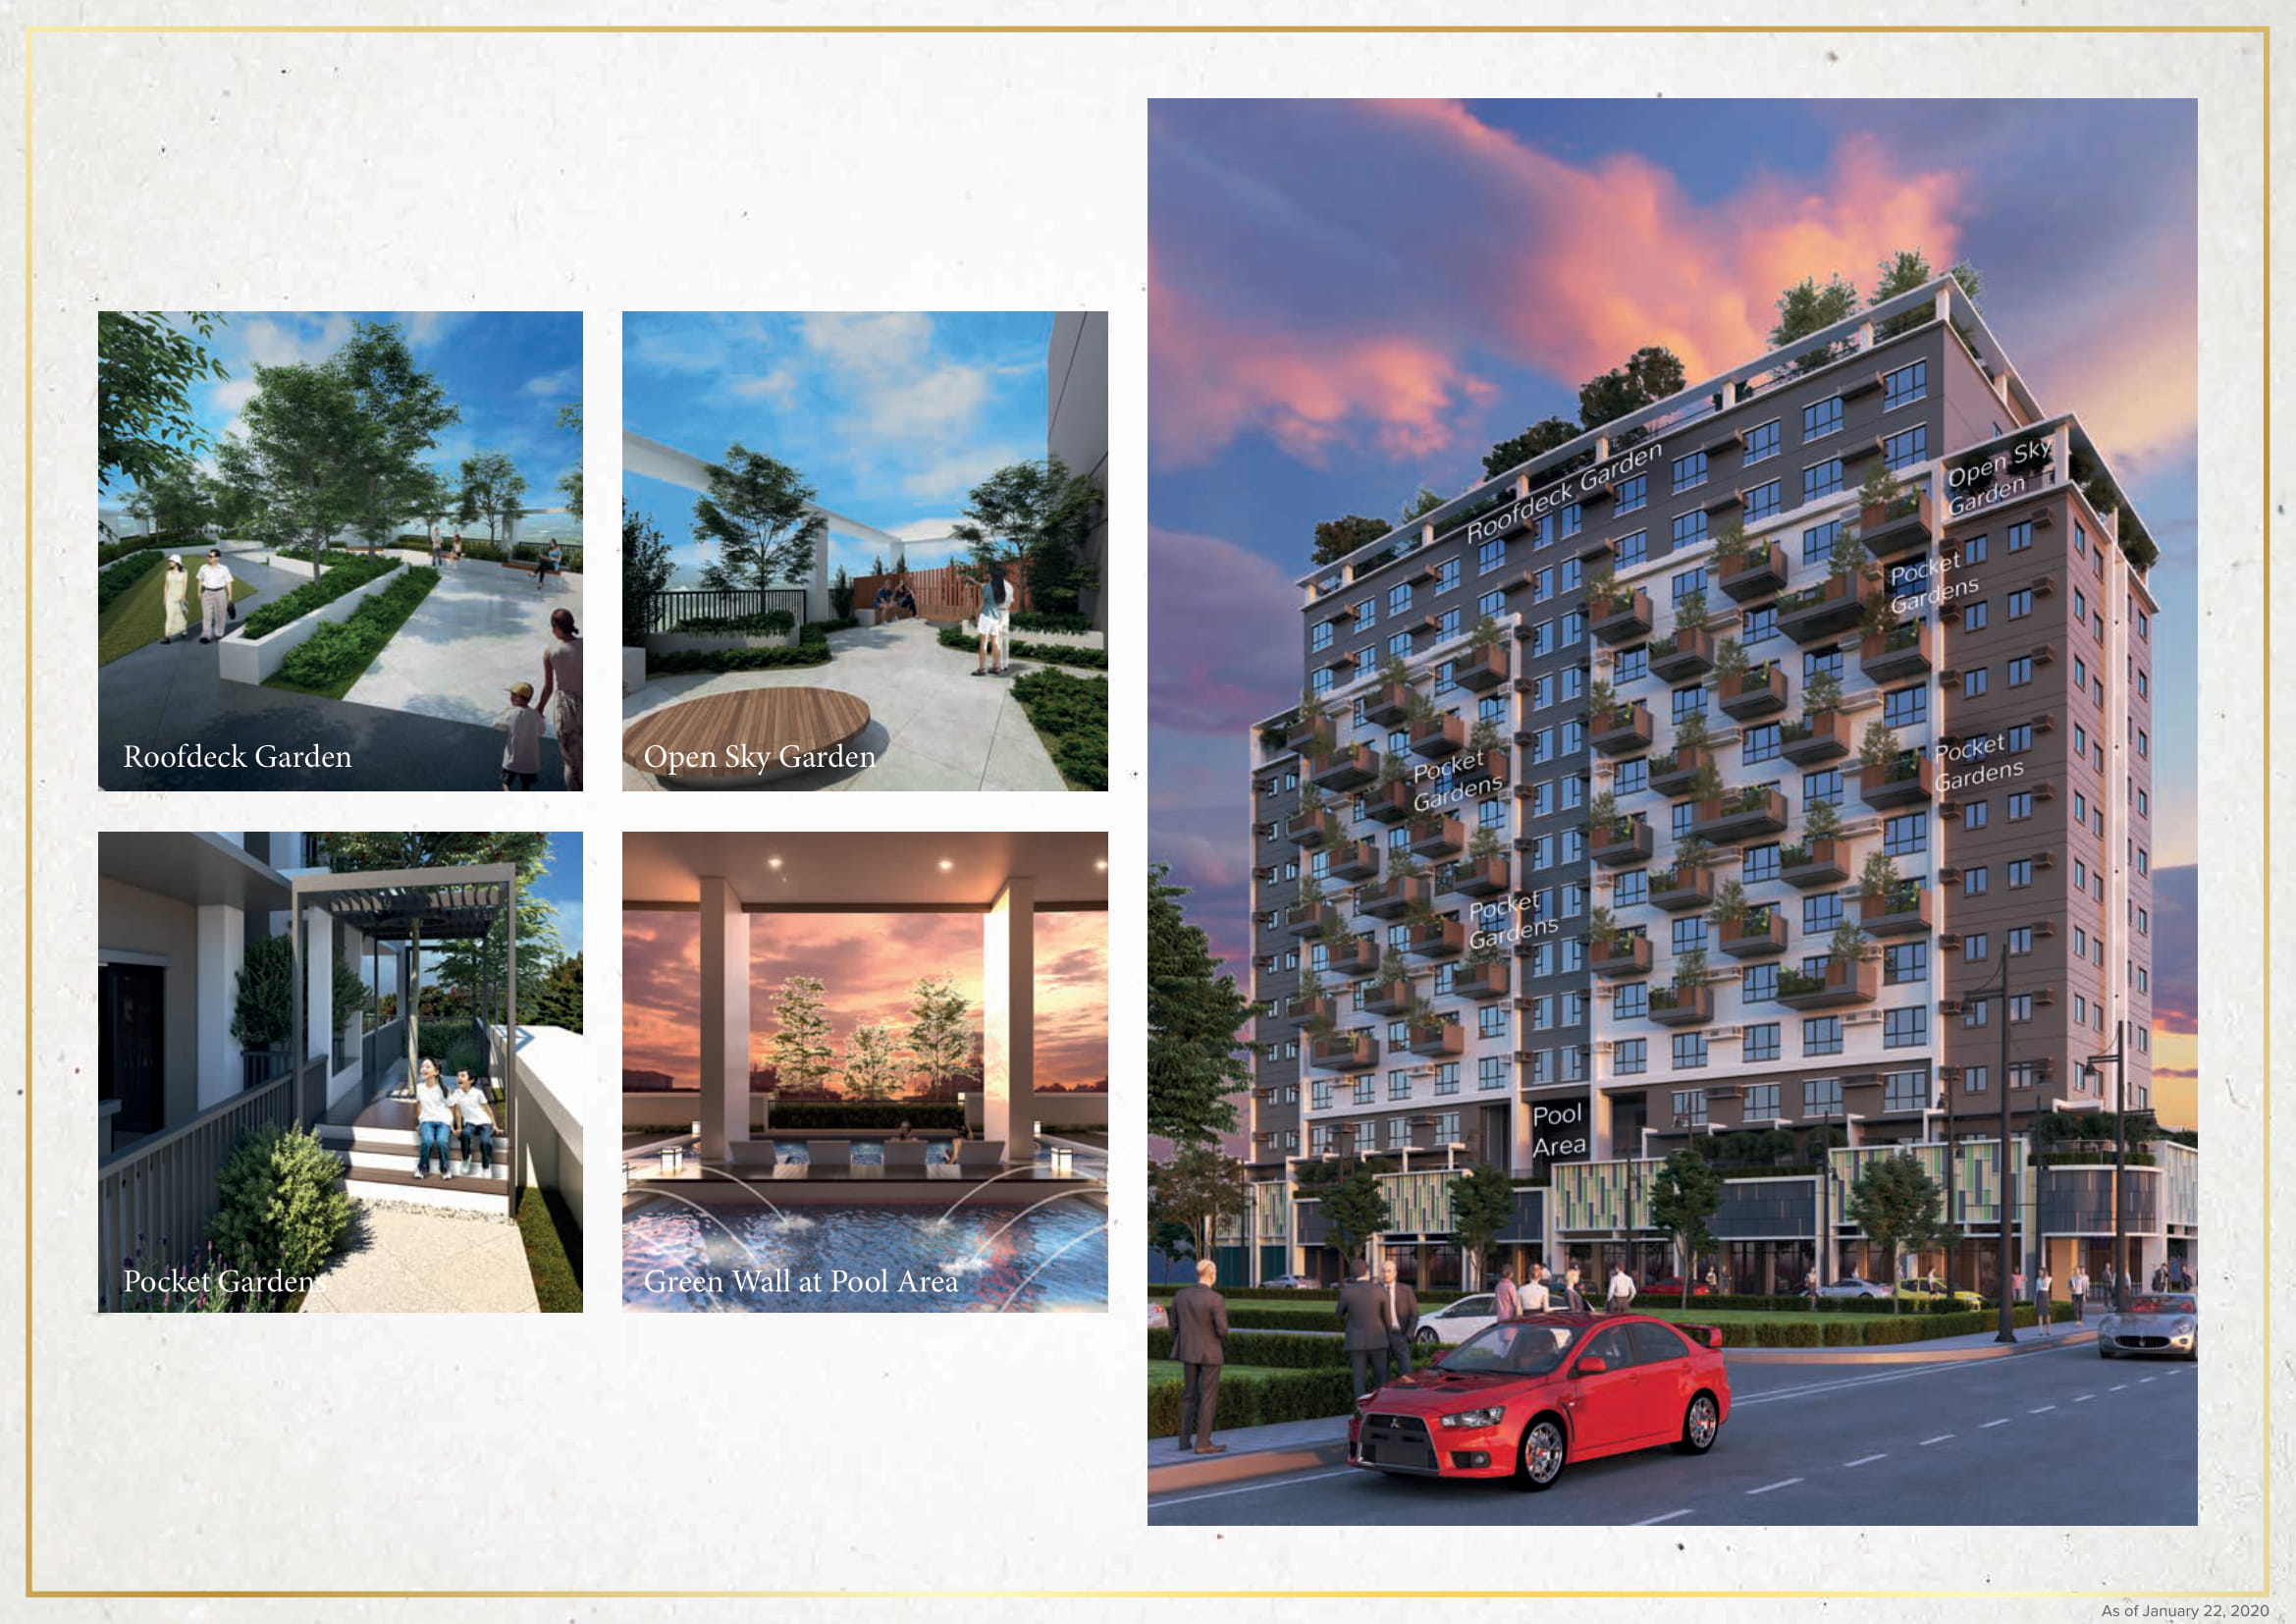 Amenity Visual Representation in the project